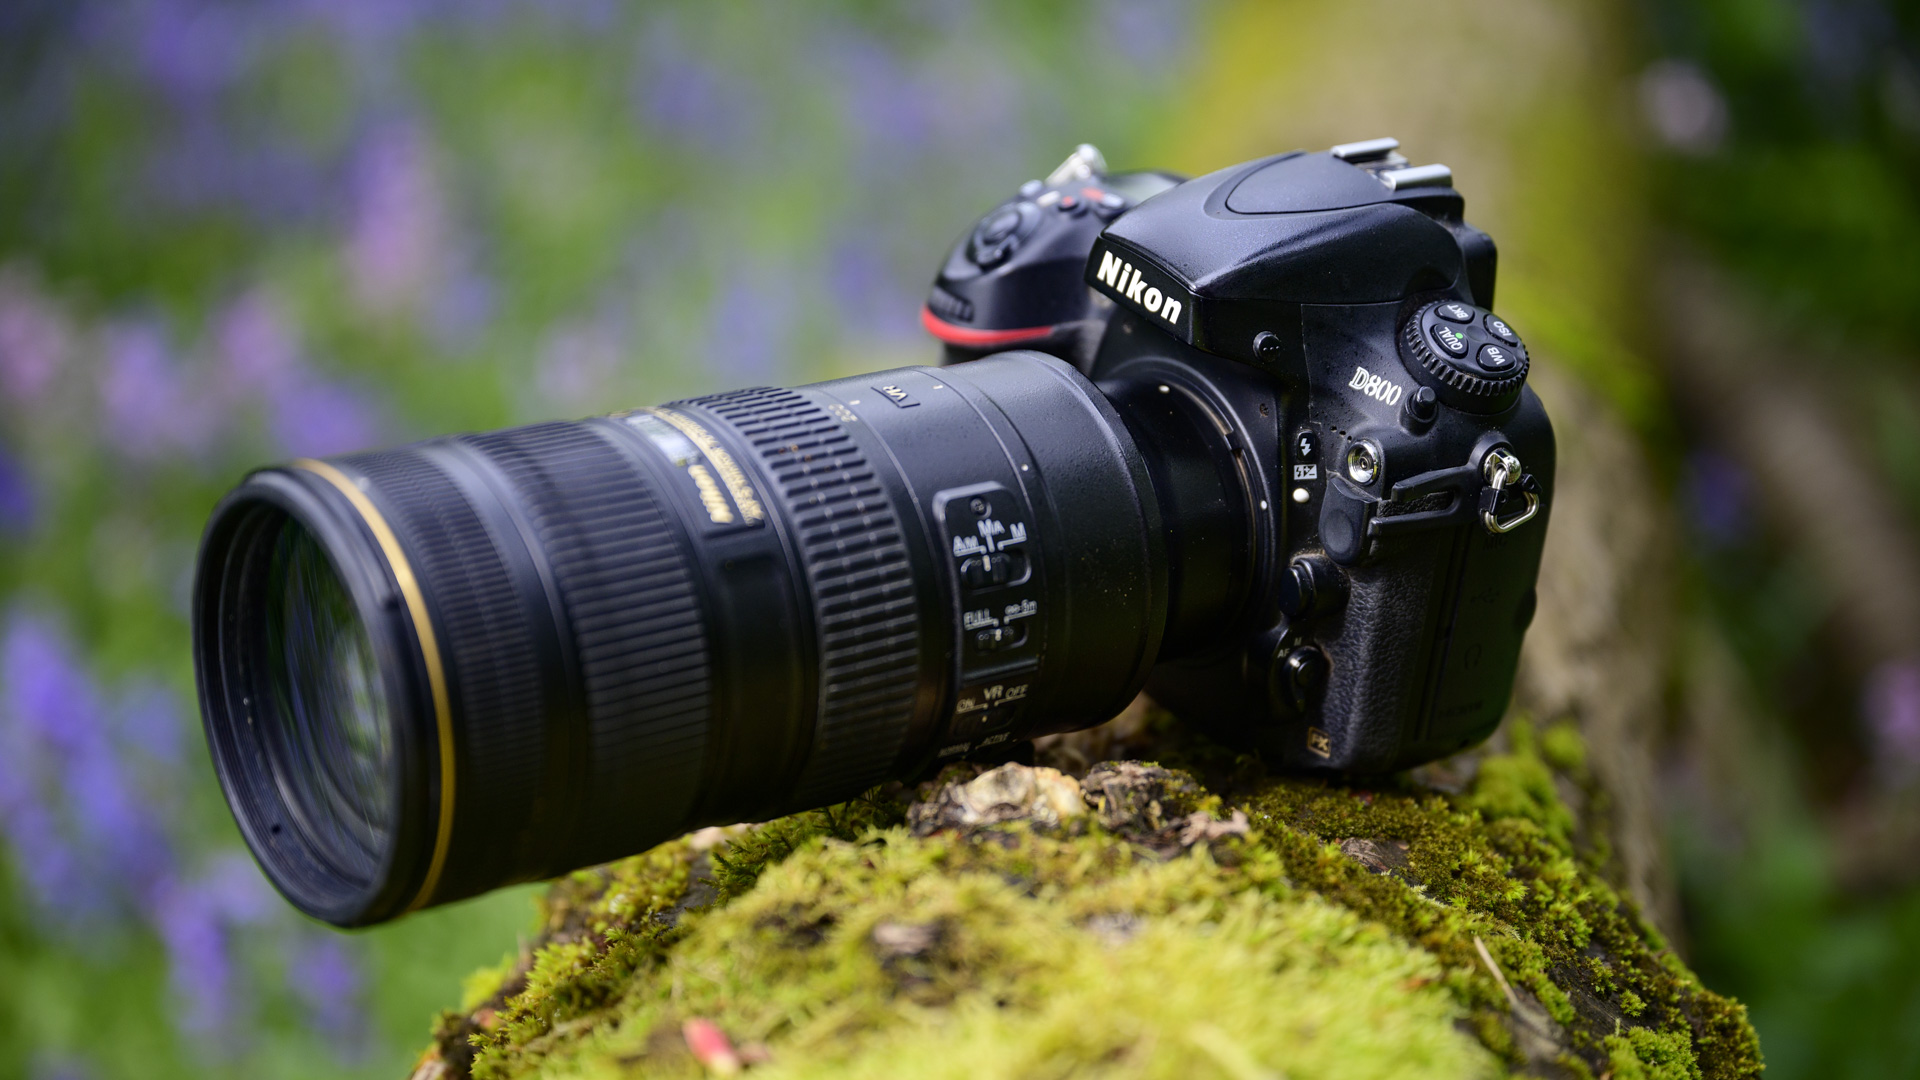 Nikon D800 DSLR camera on tree trunk surrounded by bluebells